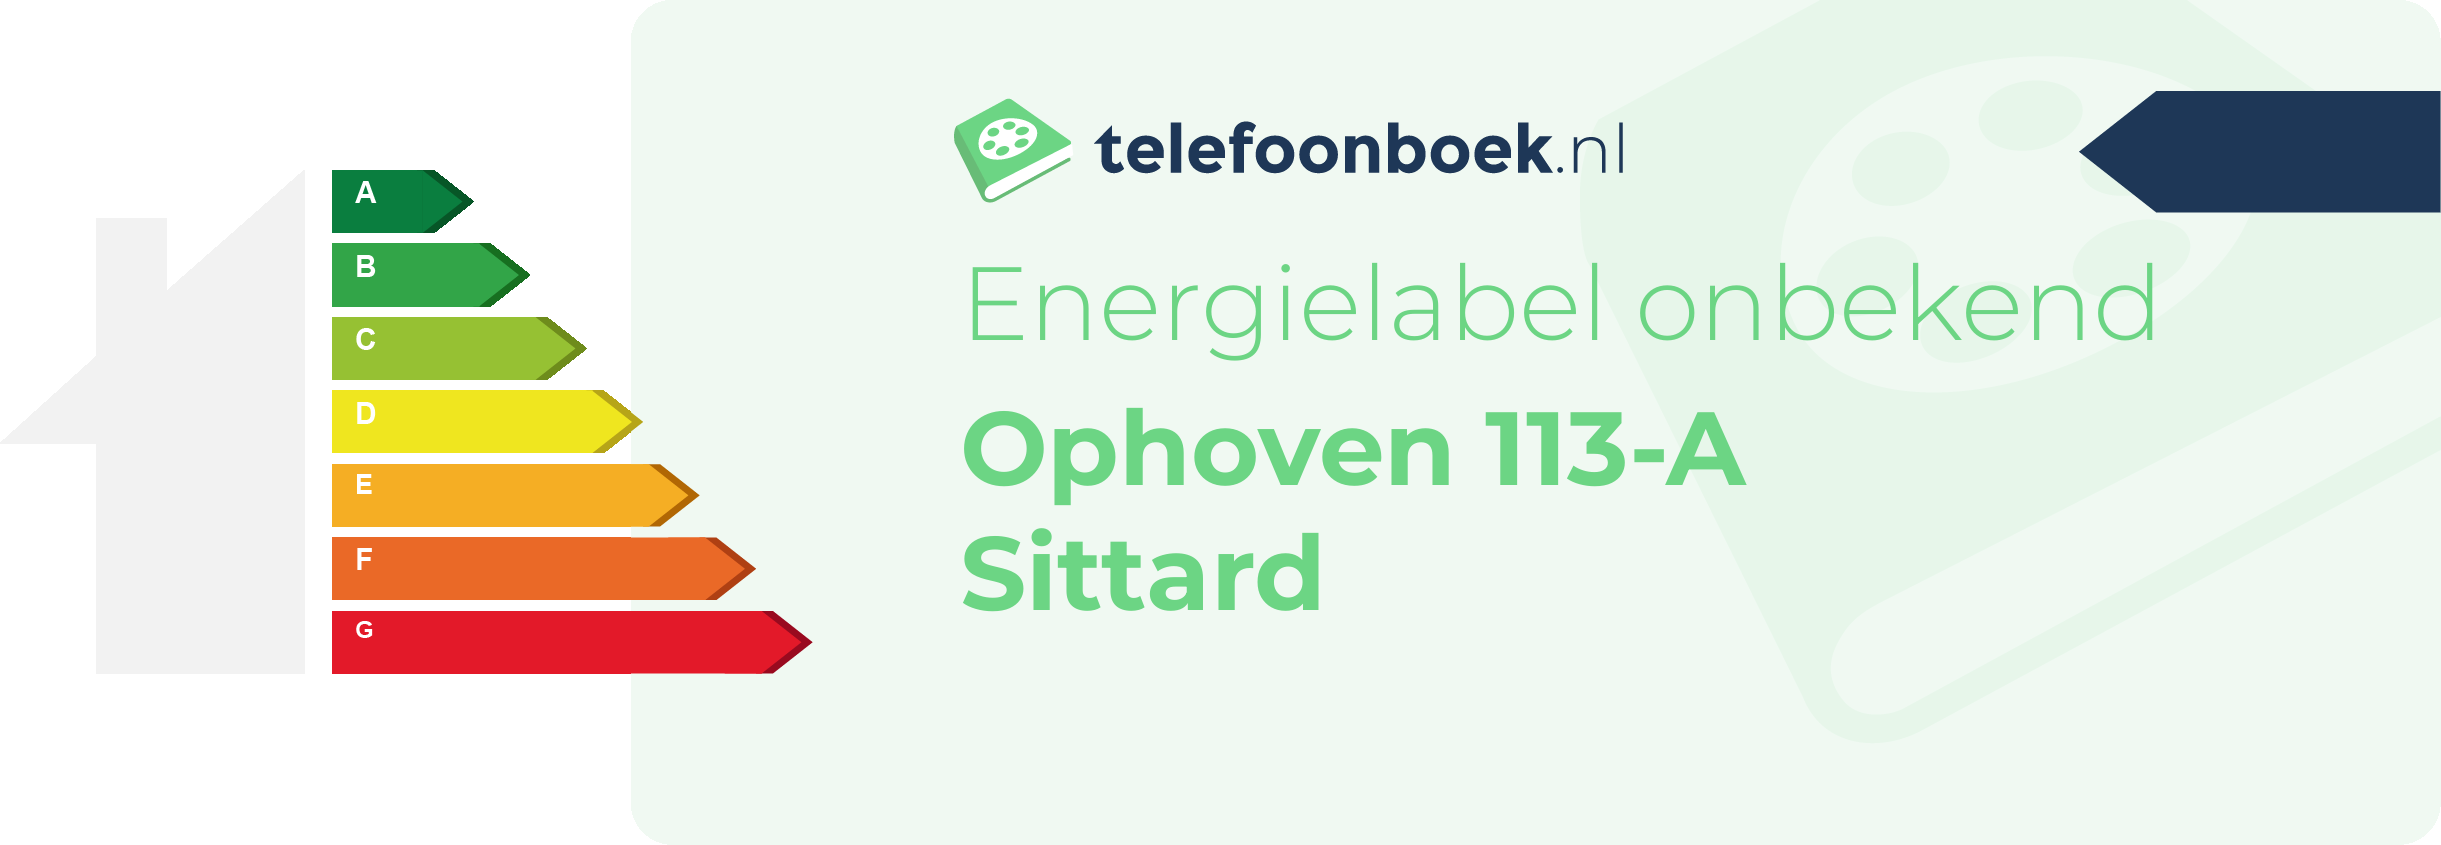 Energielabel Ophoven 113-A Sittard